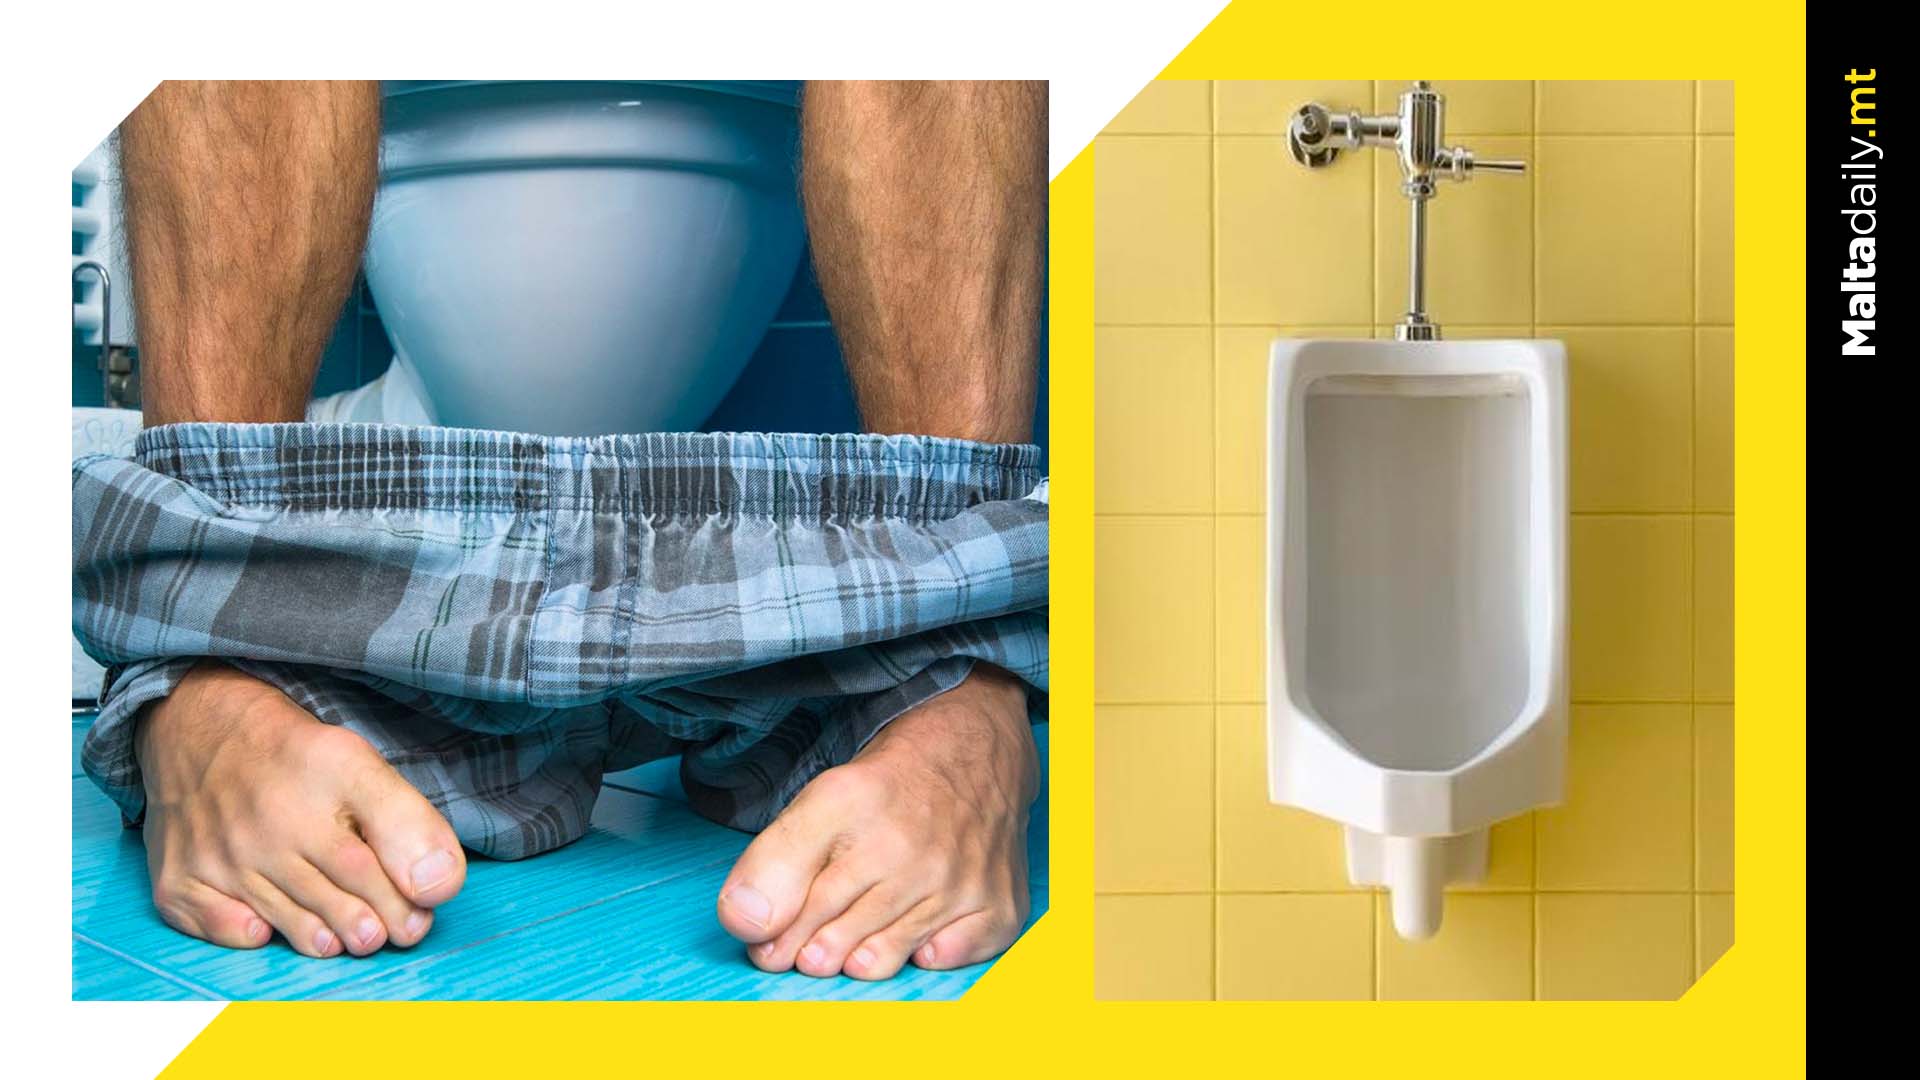 More men than expected sit down to pee, poll reveals